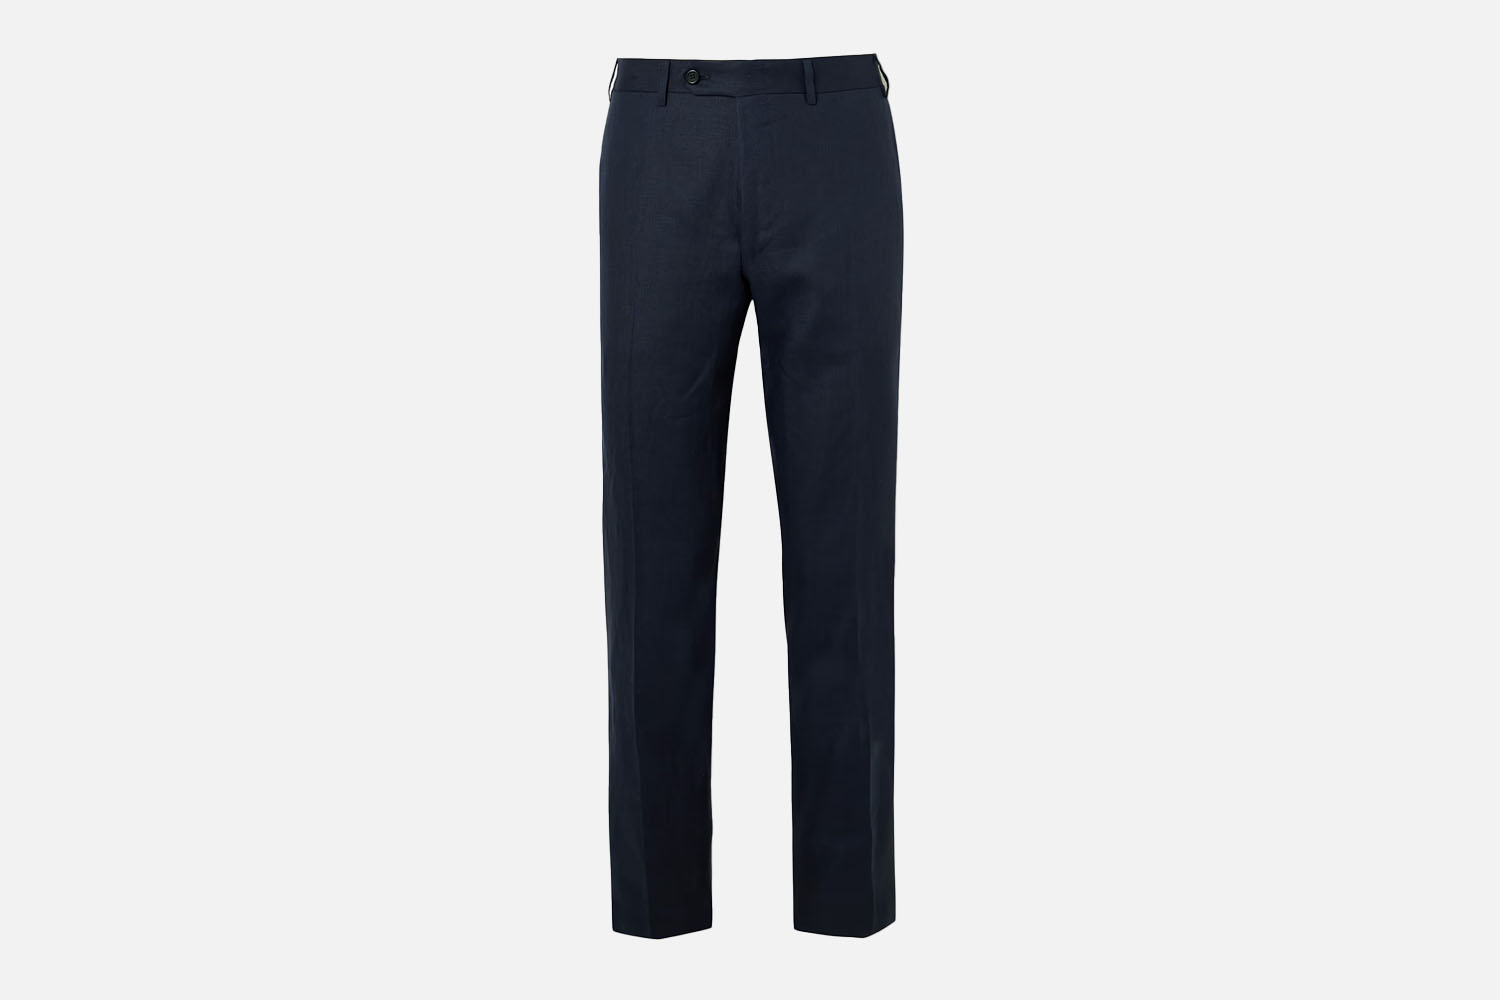 Canali Kei Slim-Fit Linen Trousers